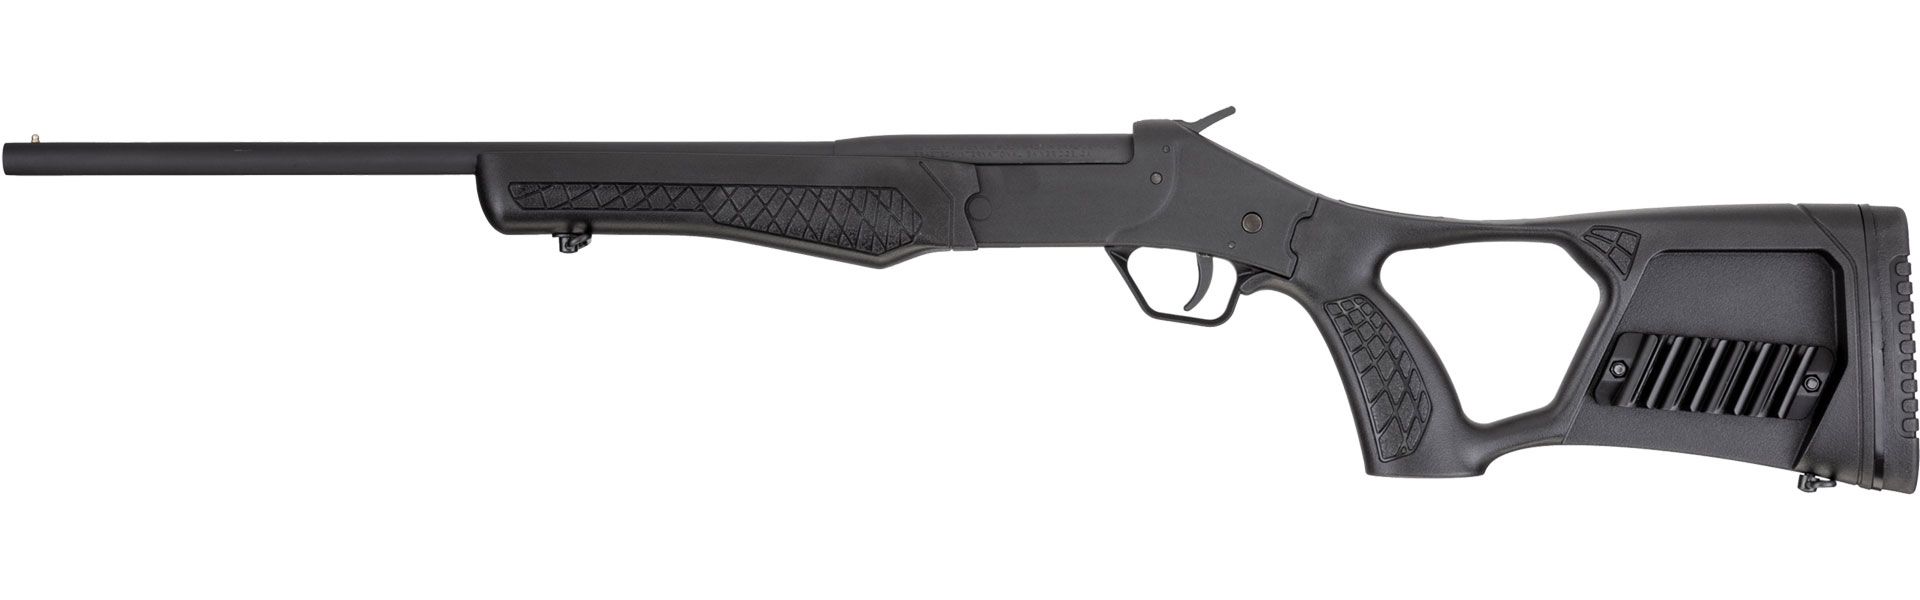 SS POLY TUFFY Polymer, 410 BORE,  Black on Black, 18 in.